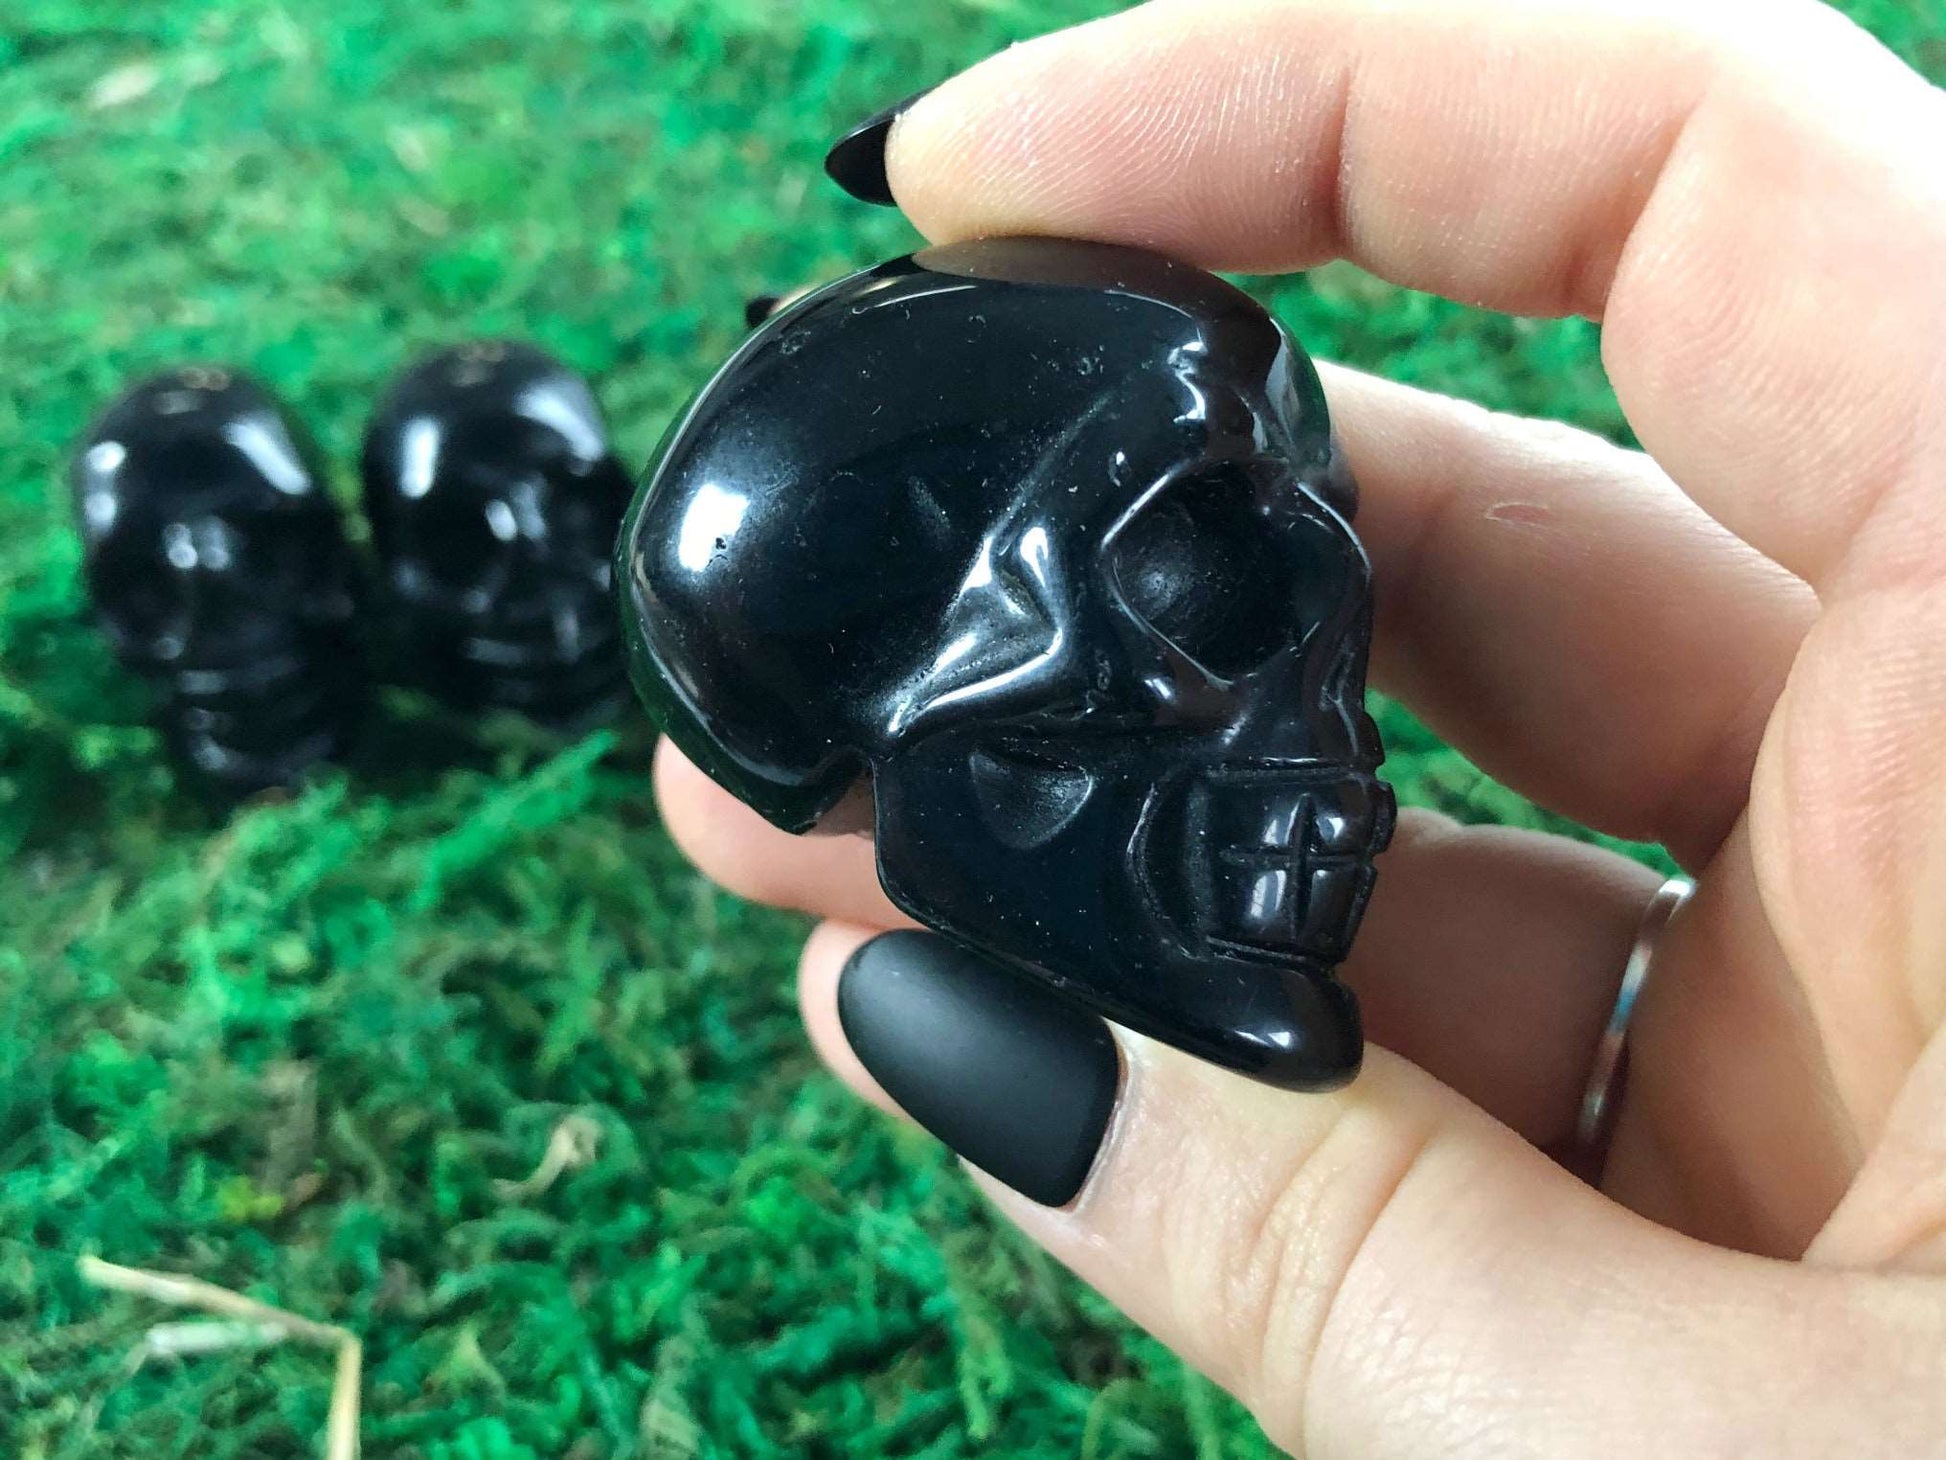 Pictured are various two inch skulls carved out of black obsidian.